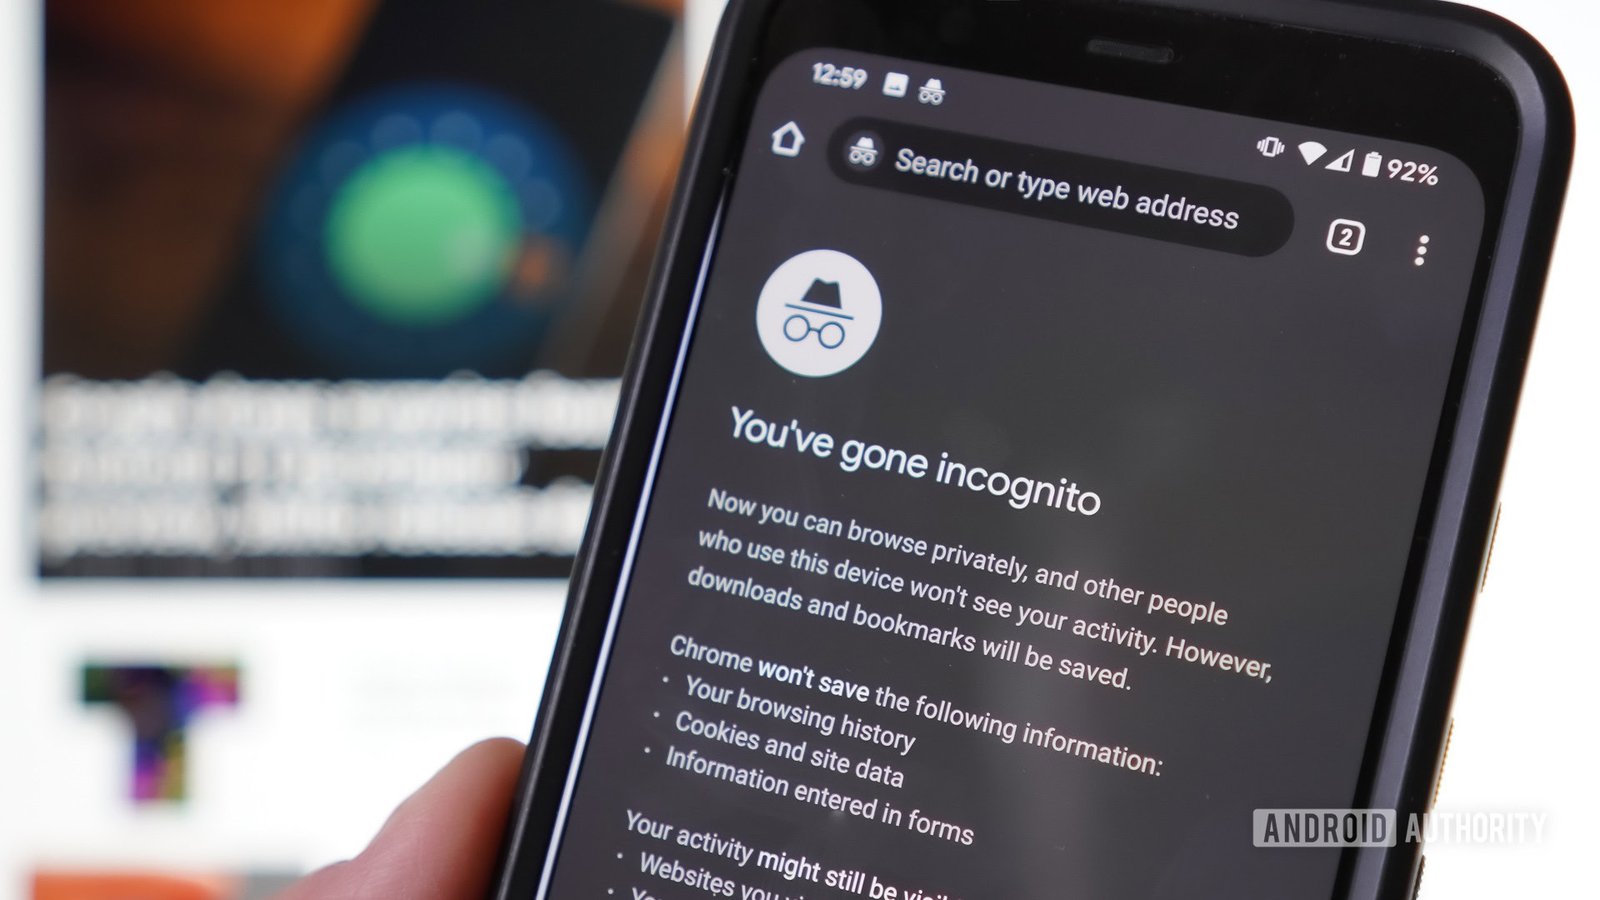 Google app makes private browsing effortless with new Incognito button (APK teardown)